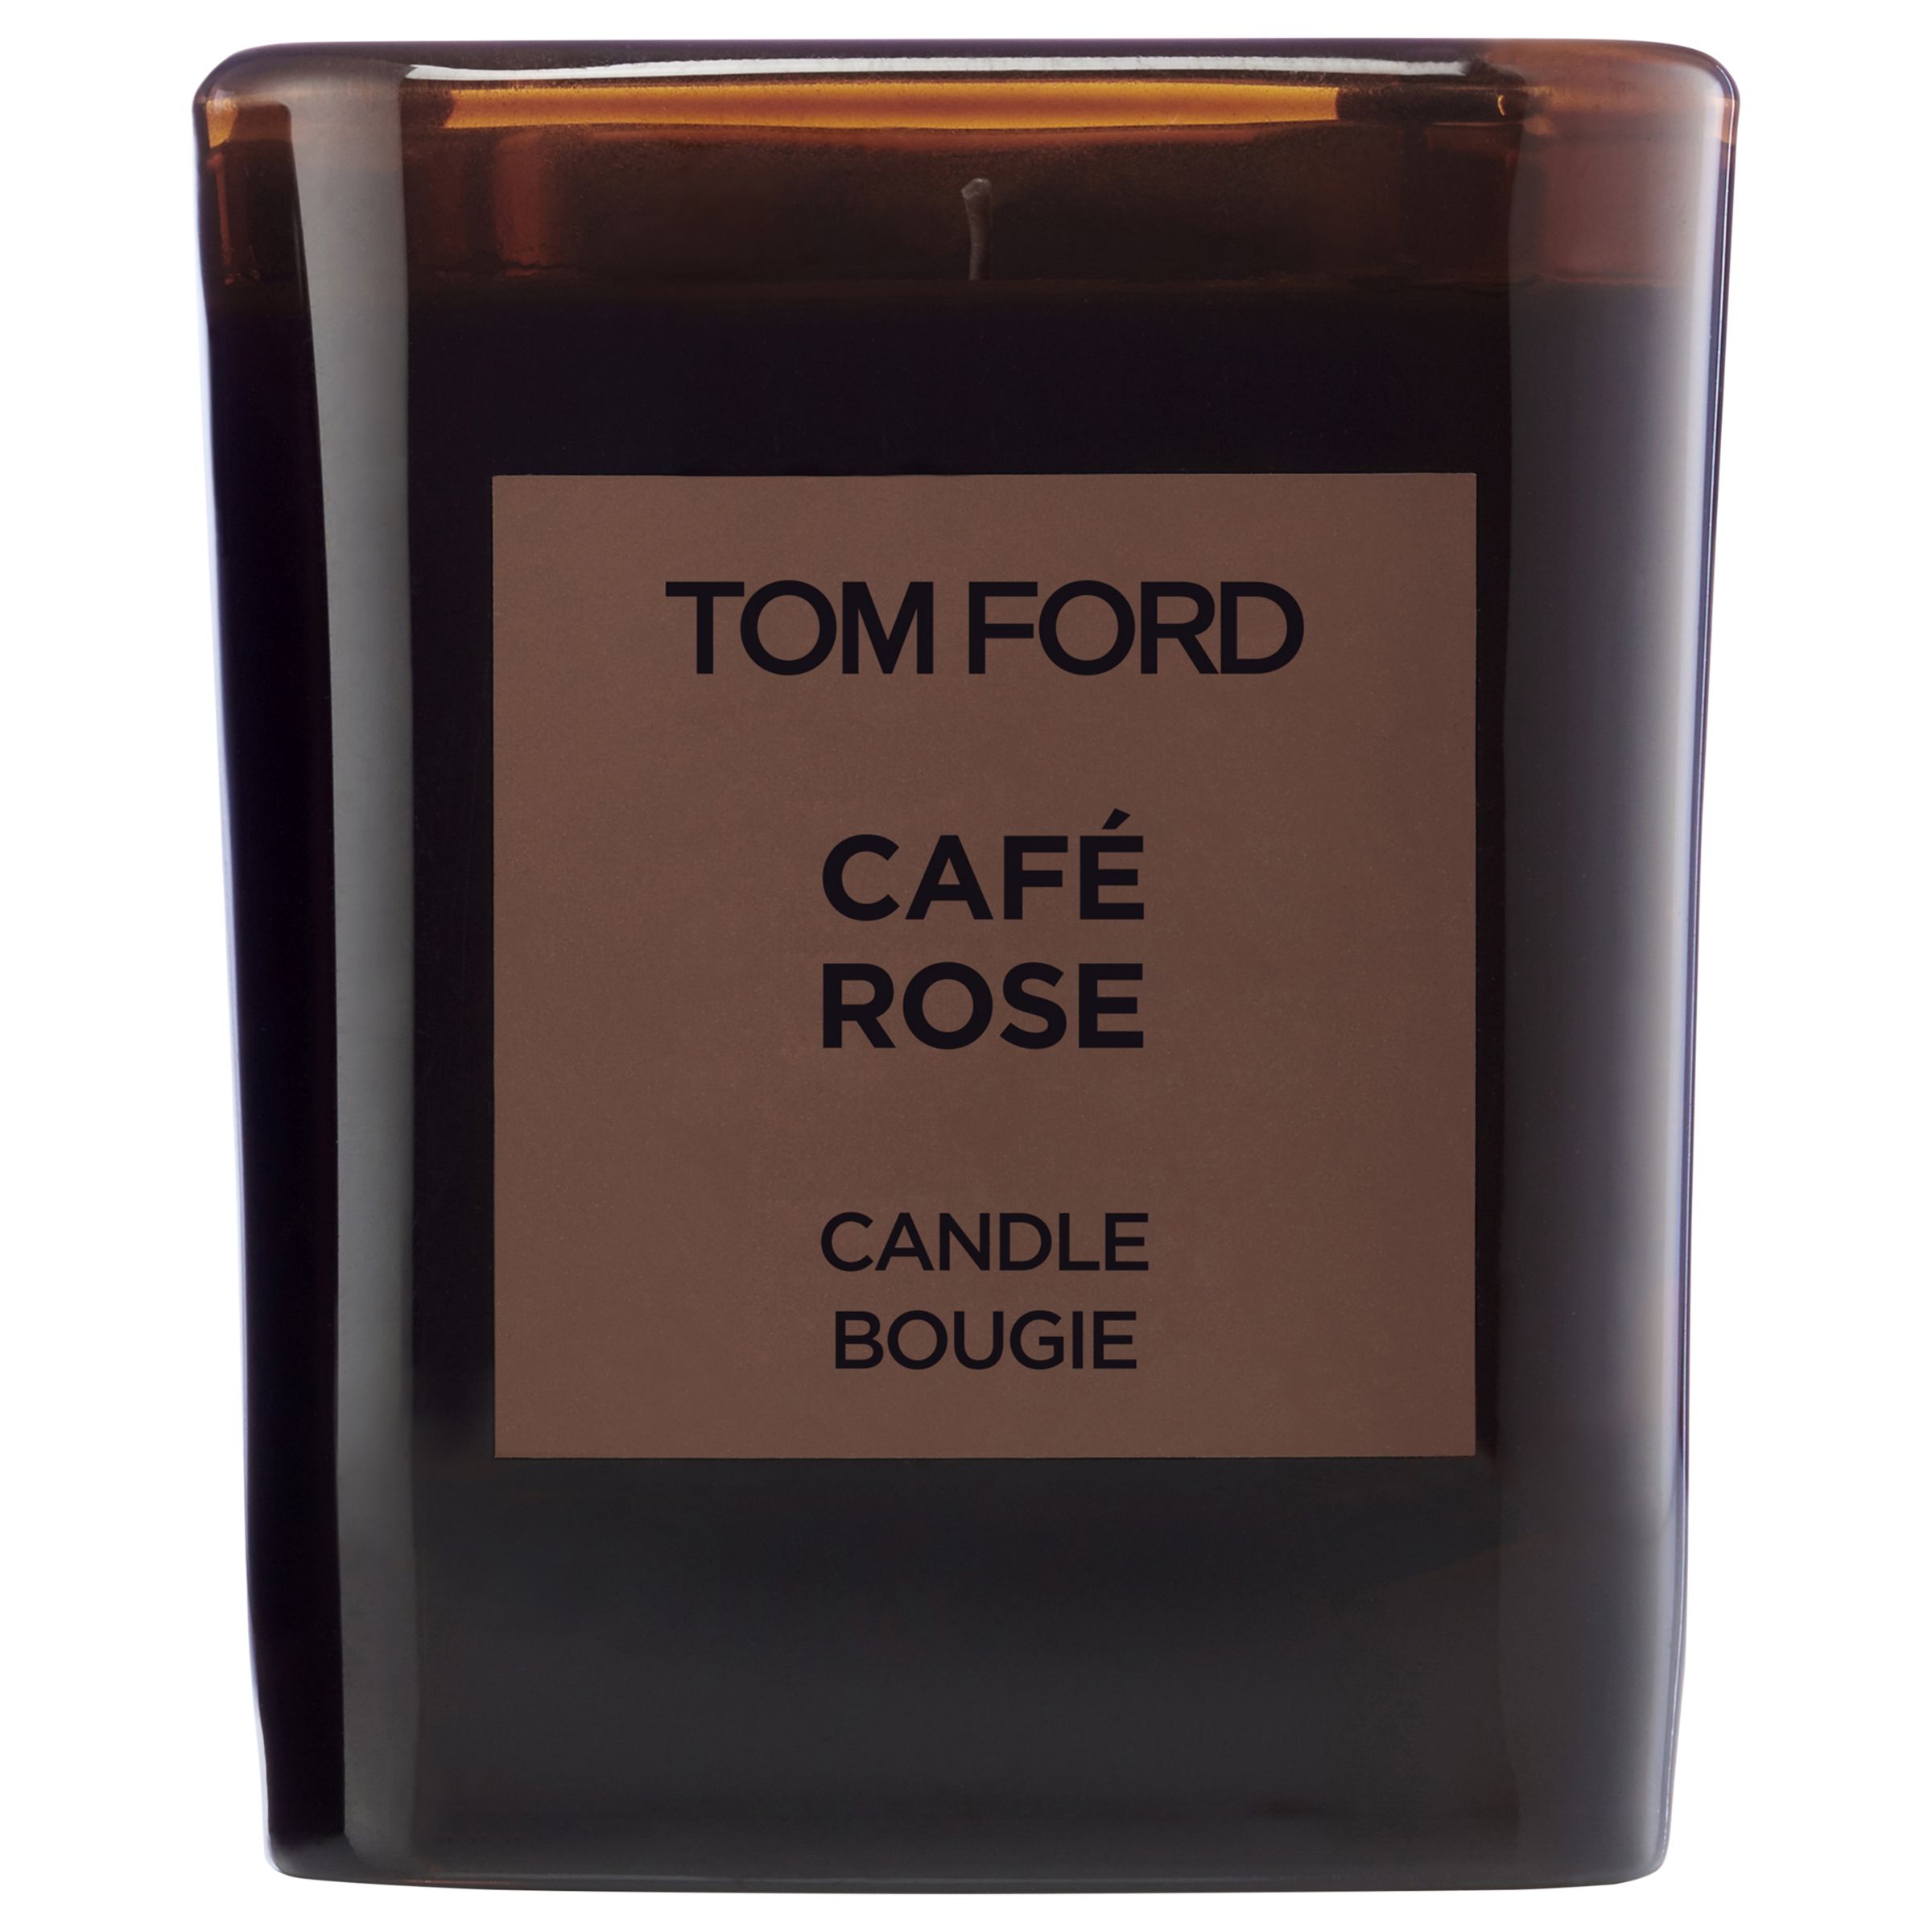 TOM FORD Private Blend Café Rose Scented Candle